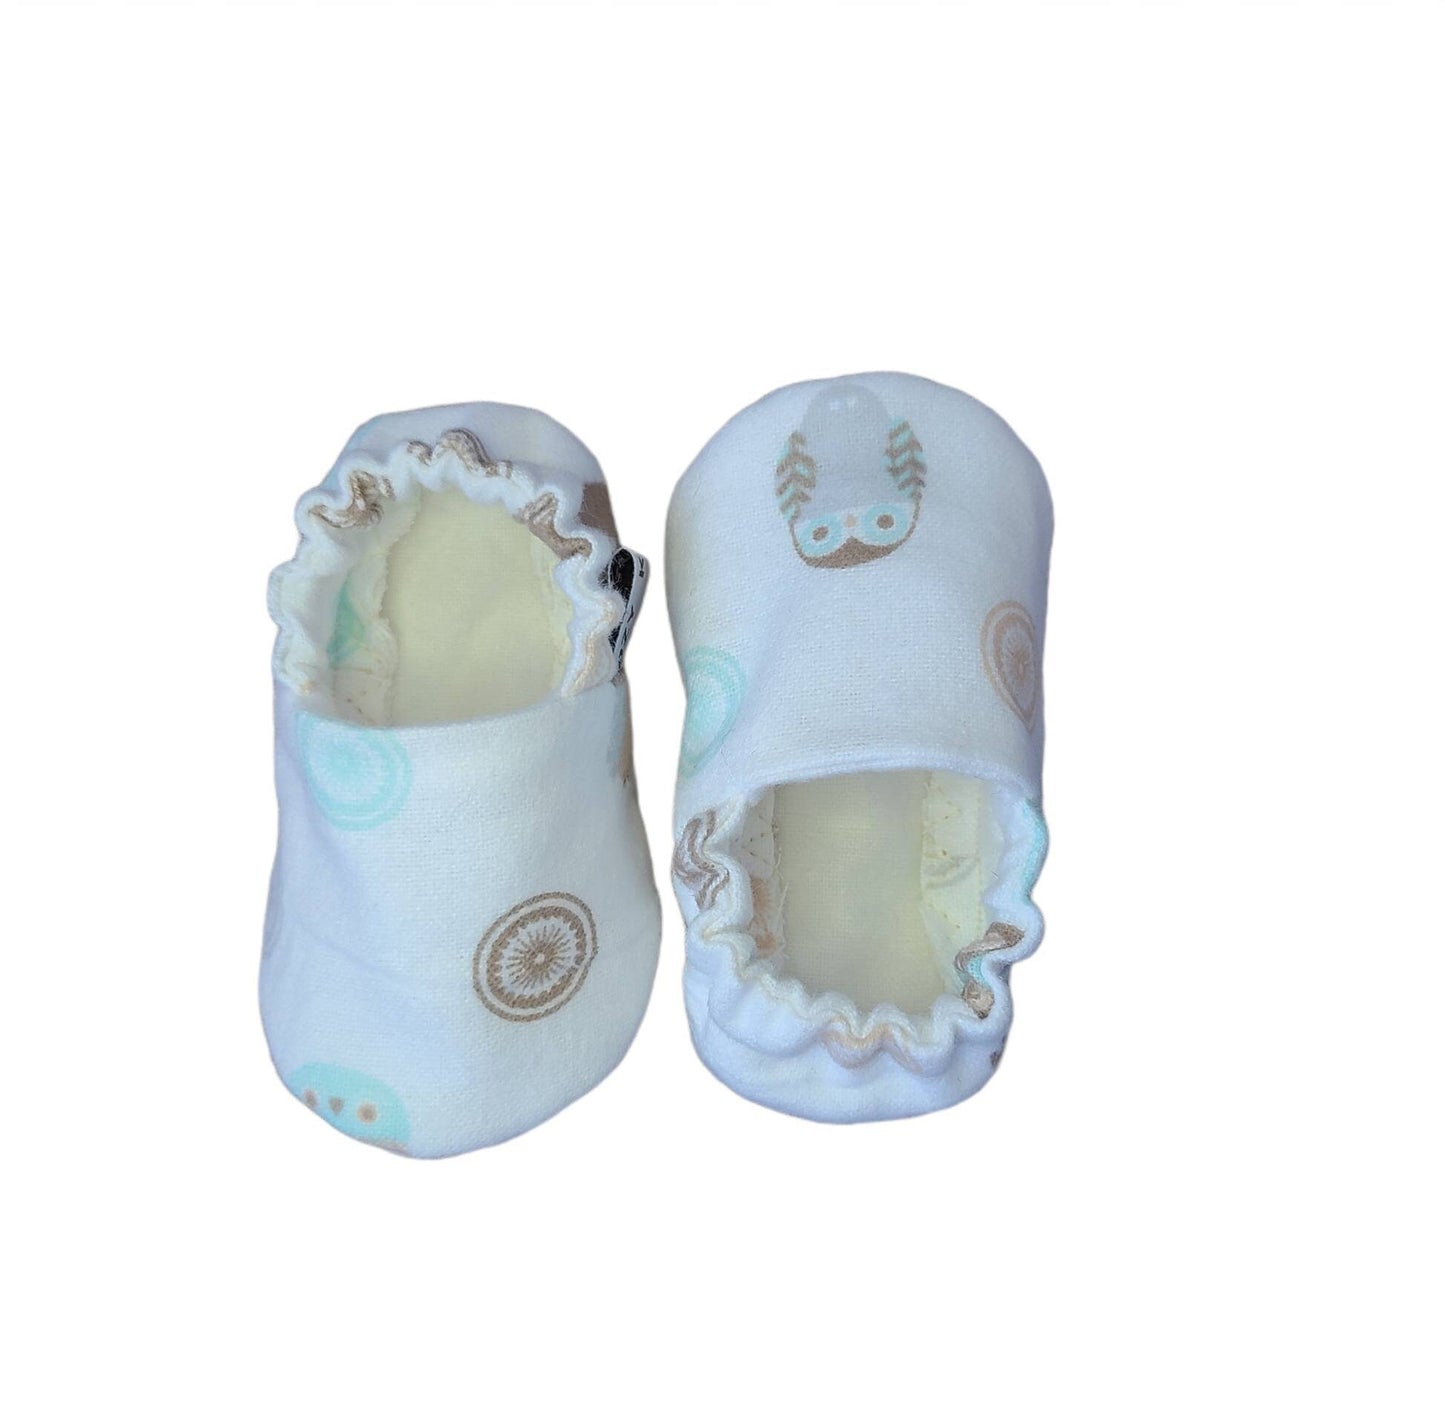 White Baby Booties, Animal Baby Shoes, Newborn Crib Shoes, Newborn Baby Moccs, Baby Shoes, Baby Slippers, Children Slippers, Soft Soled Shoe